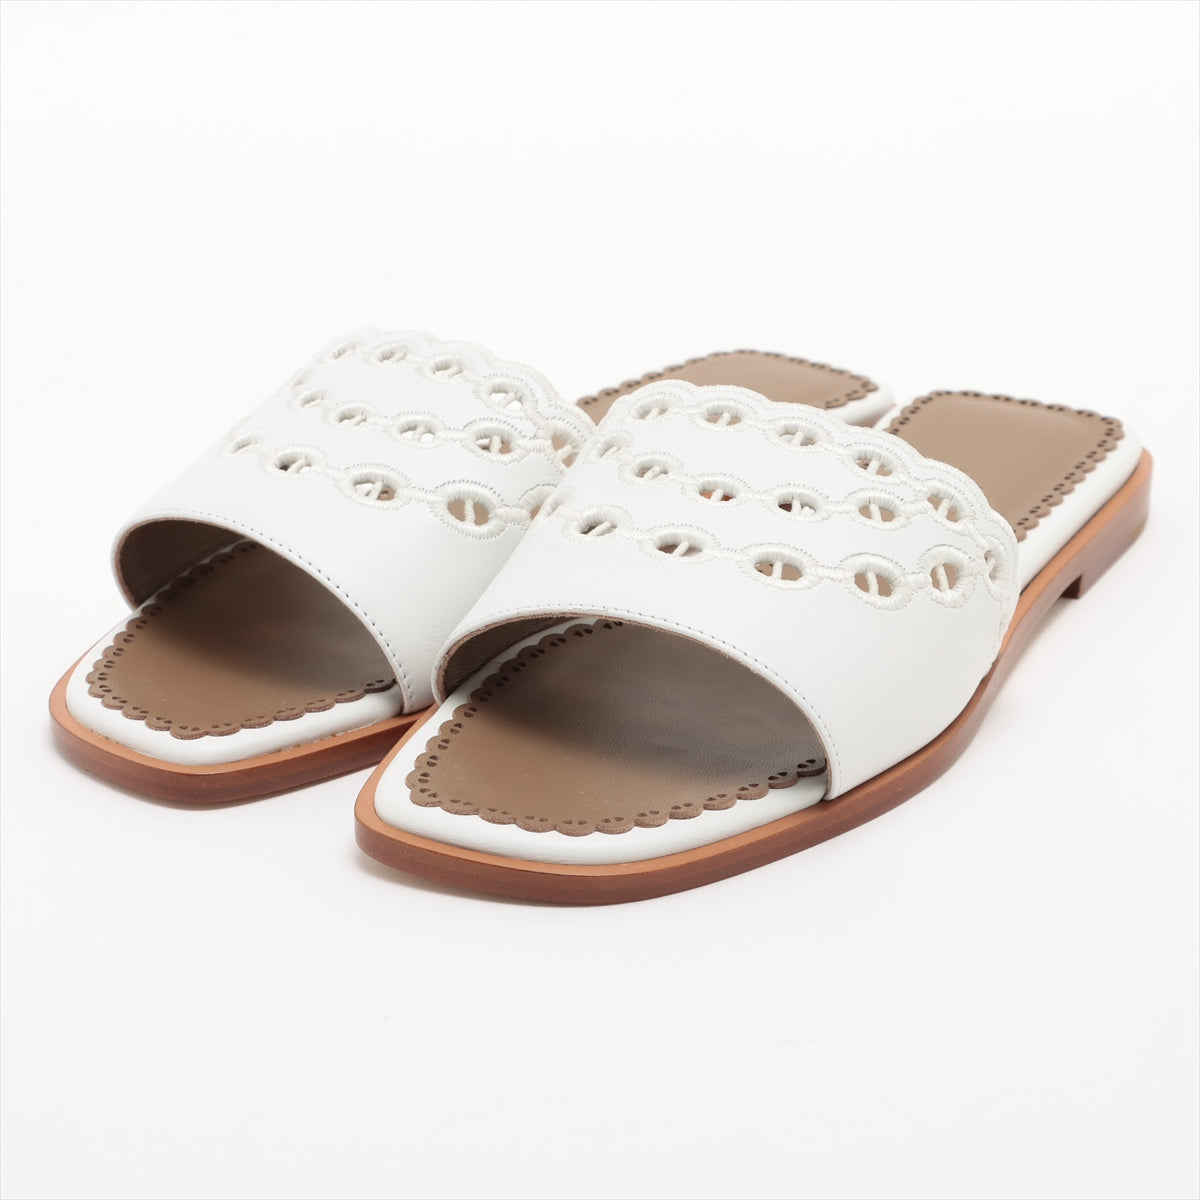 Hermès Leather Sandals 35 Ladies' White x brown frog box There is a bag